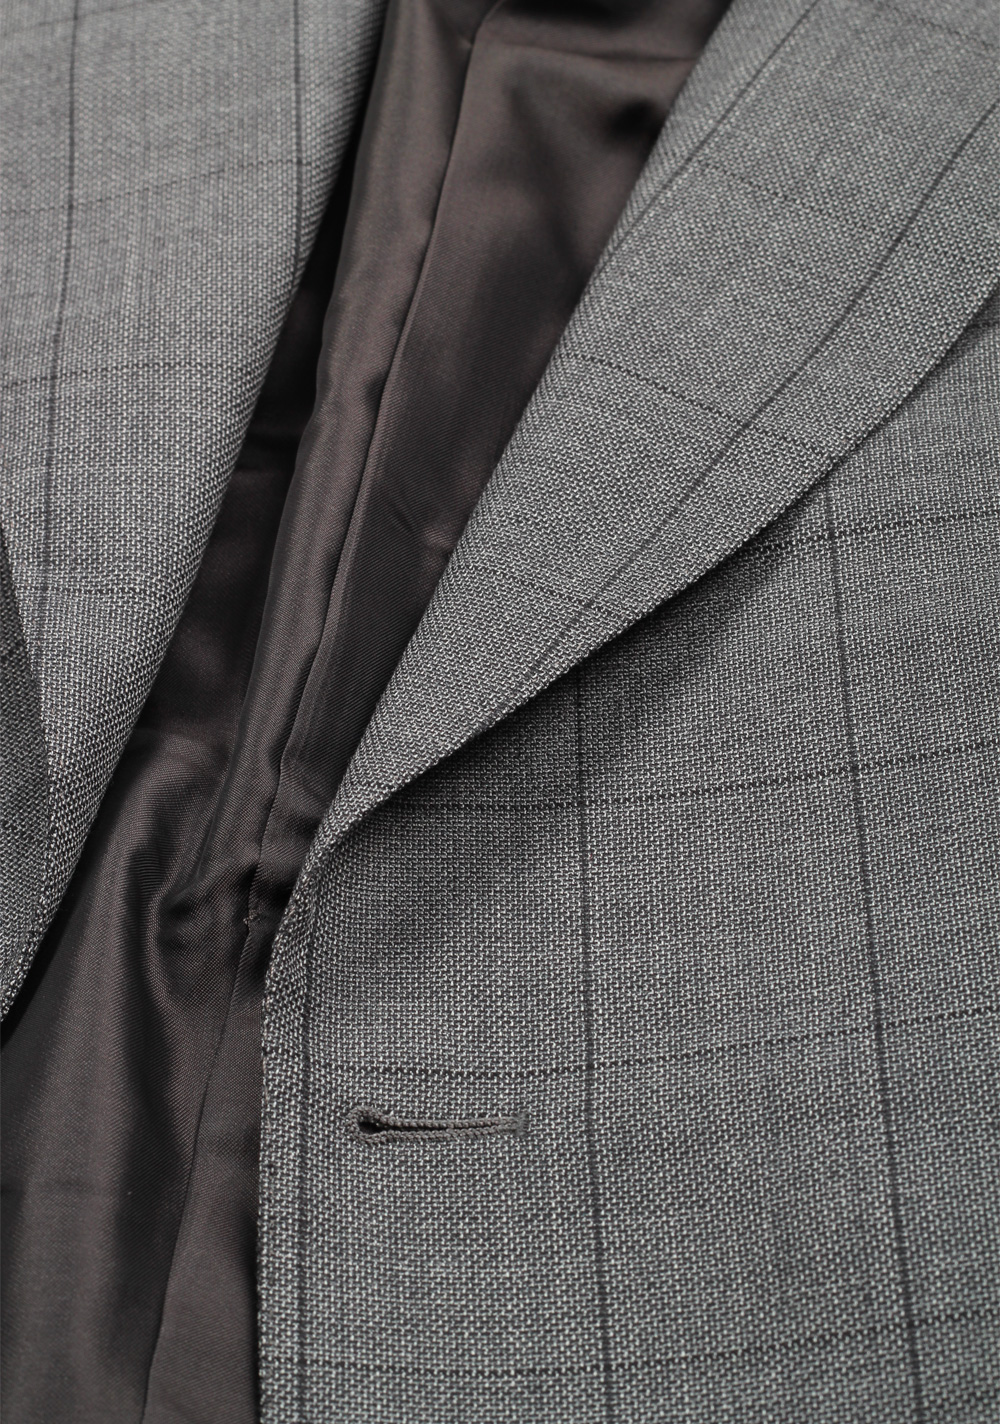 TOM FORD Windsor Checked Gray Suit | Costume Limité